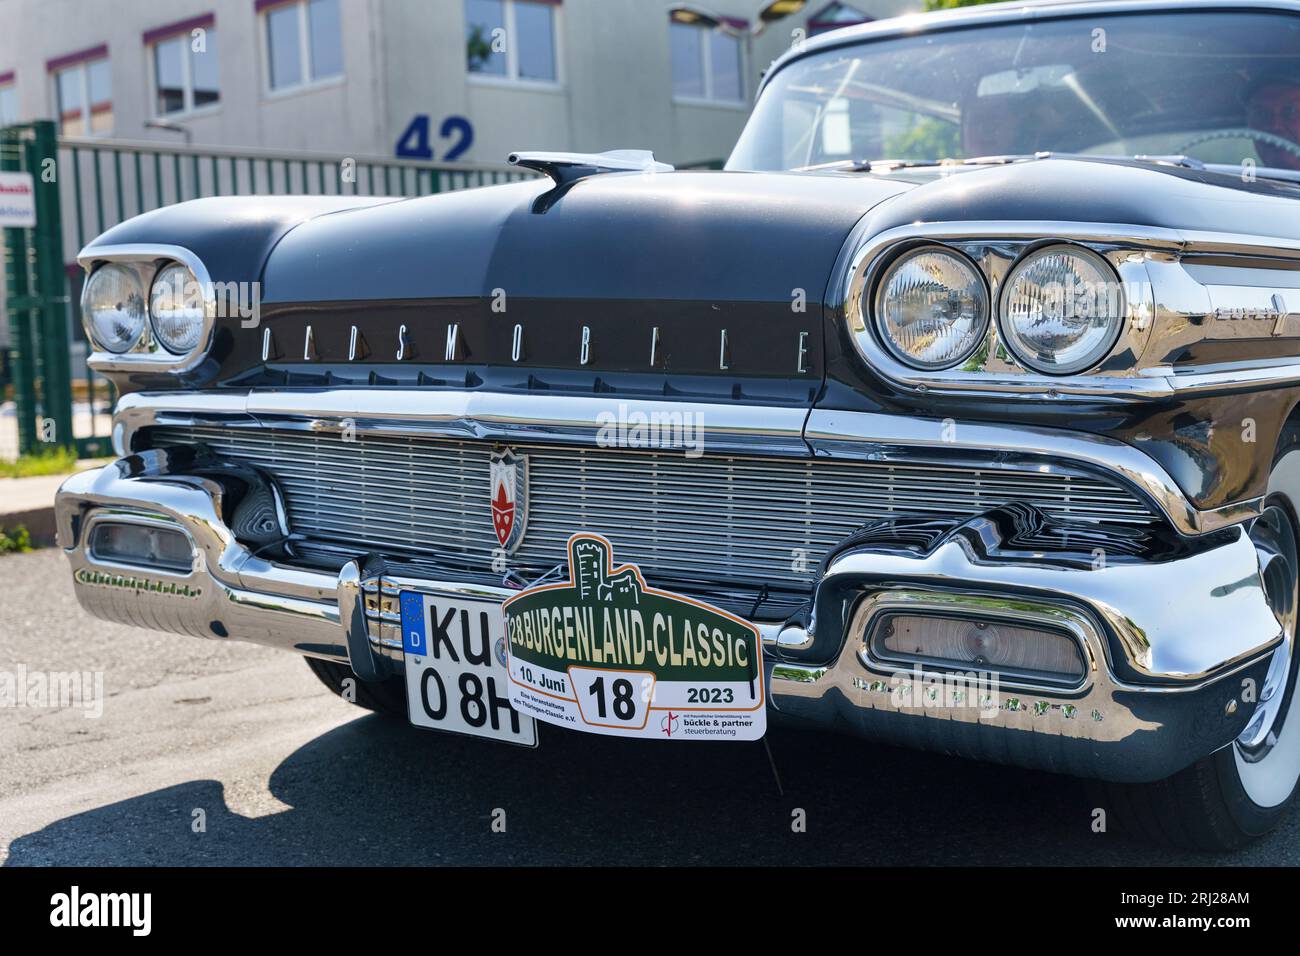 Waltershausen, Germany - June 10, 2023: A vintage American Oldsmobile Rocket Super 88 is parked in front of a Burgenland classic. Front view of headli Stock Photo